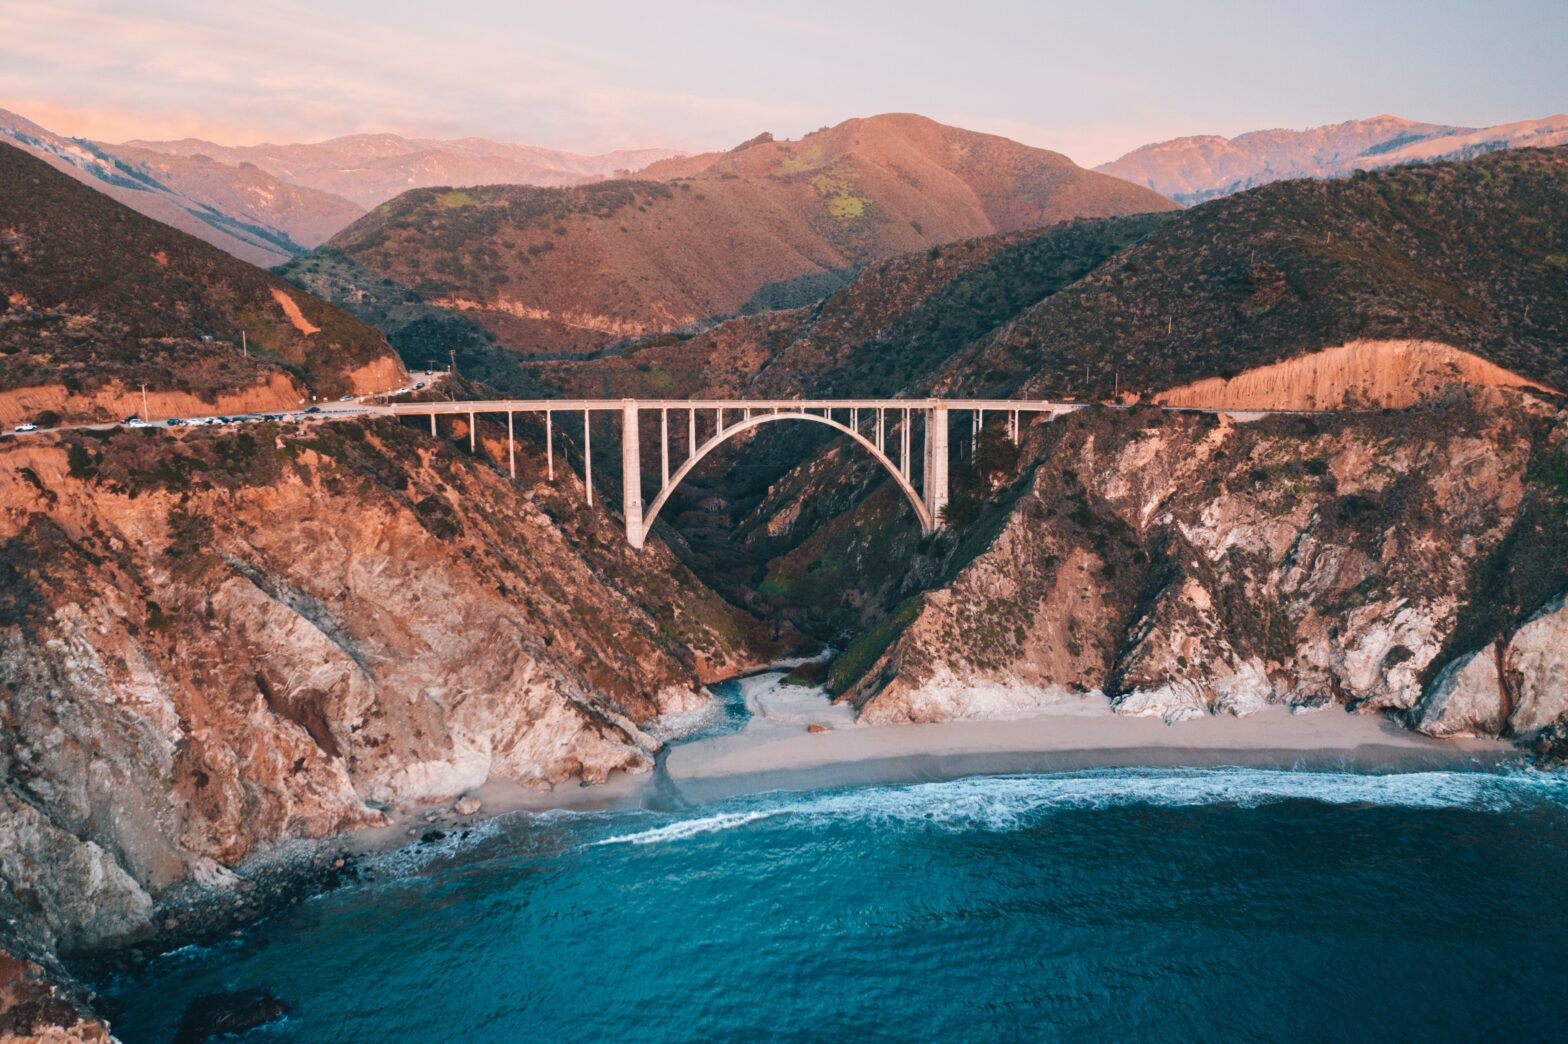 If you're wondering where to stay in Big Sur, California, check out our guide today. Pictured here is the beautiful coastal region of Big Sur.